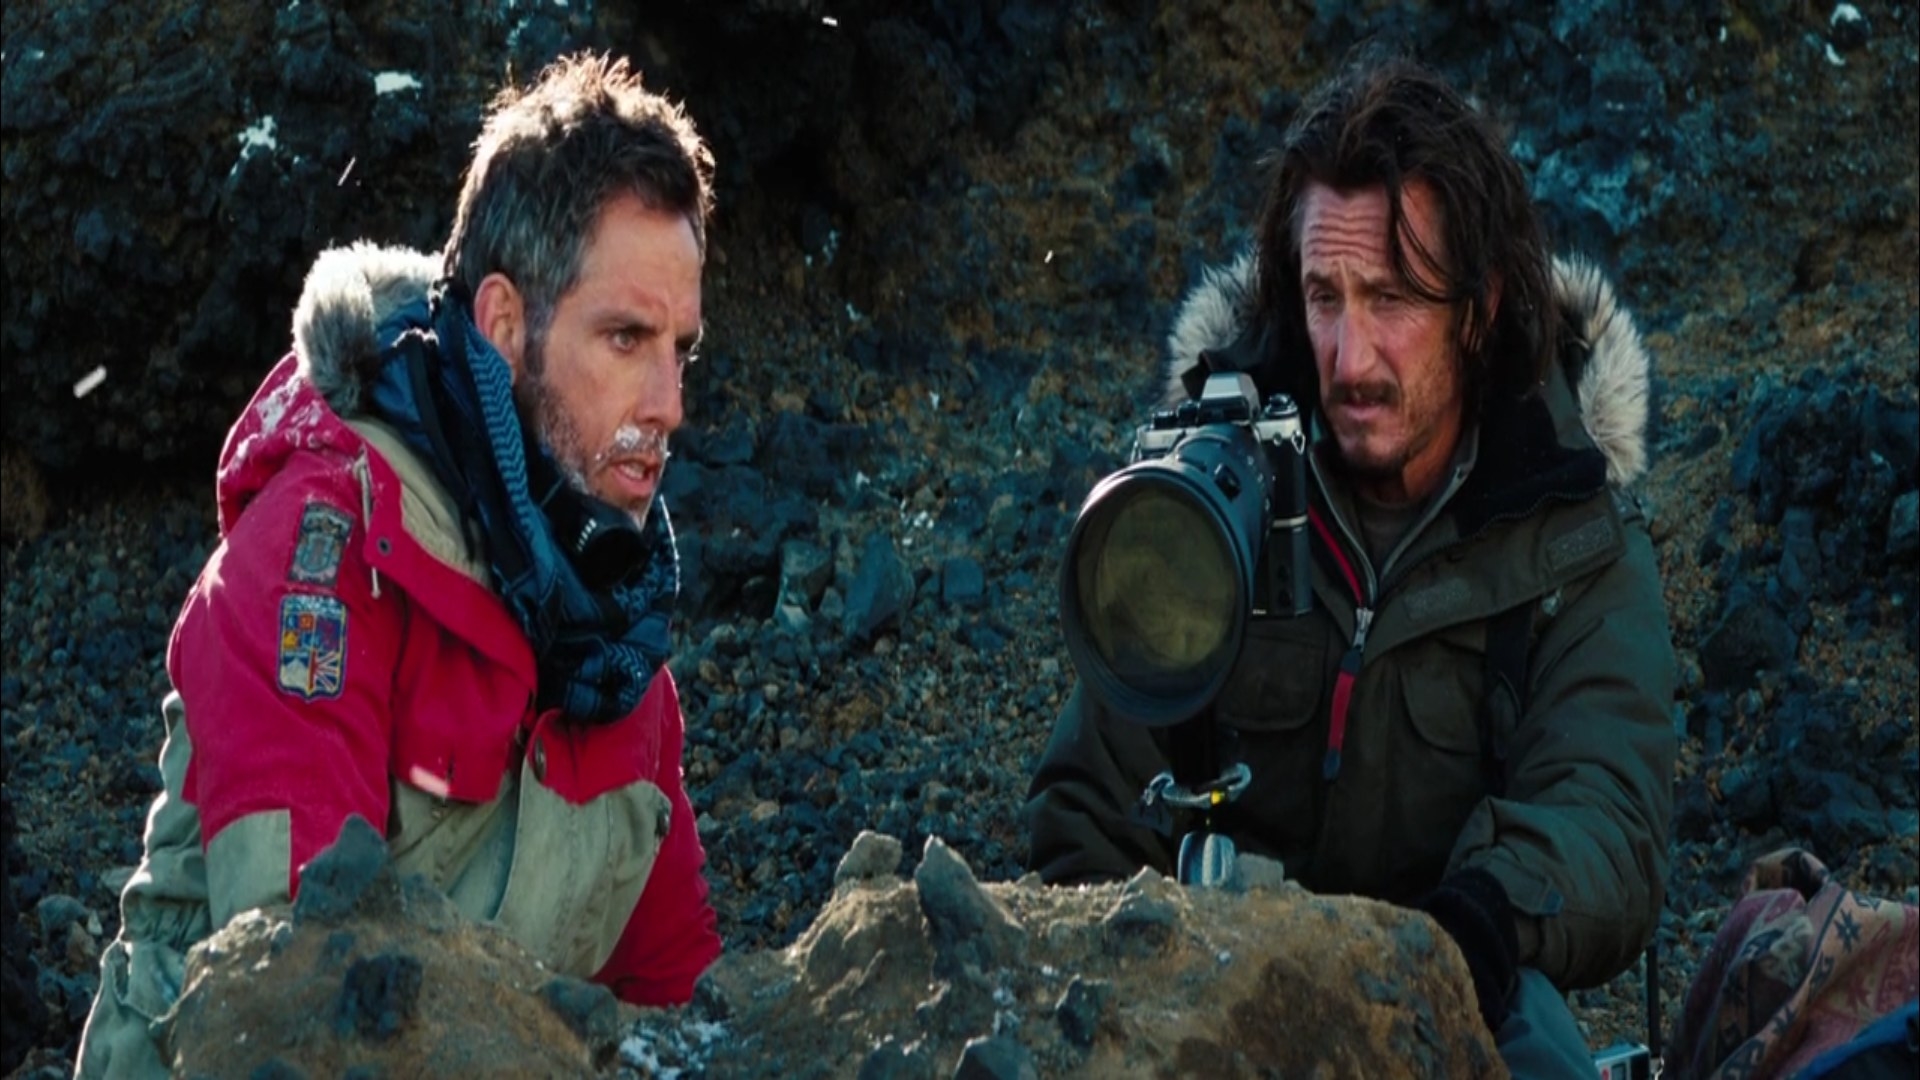 Ben Stiller on top of a mountain talks to Sean Penn who has a big camera in front of him